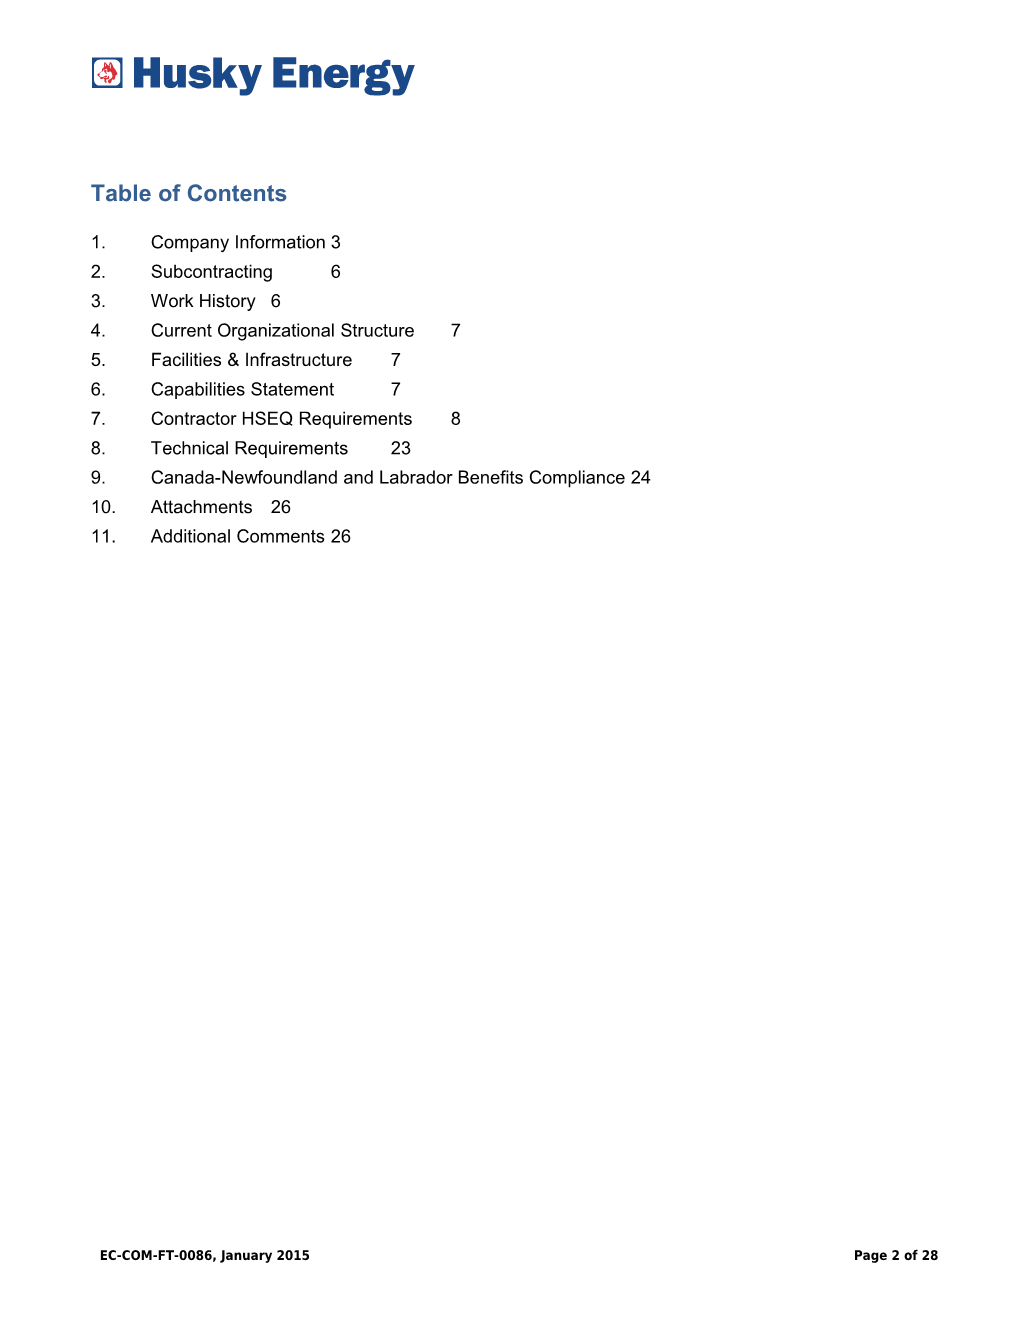 Table of Contents s357